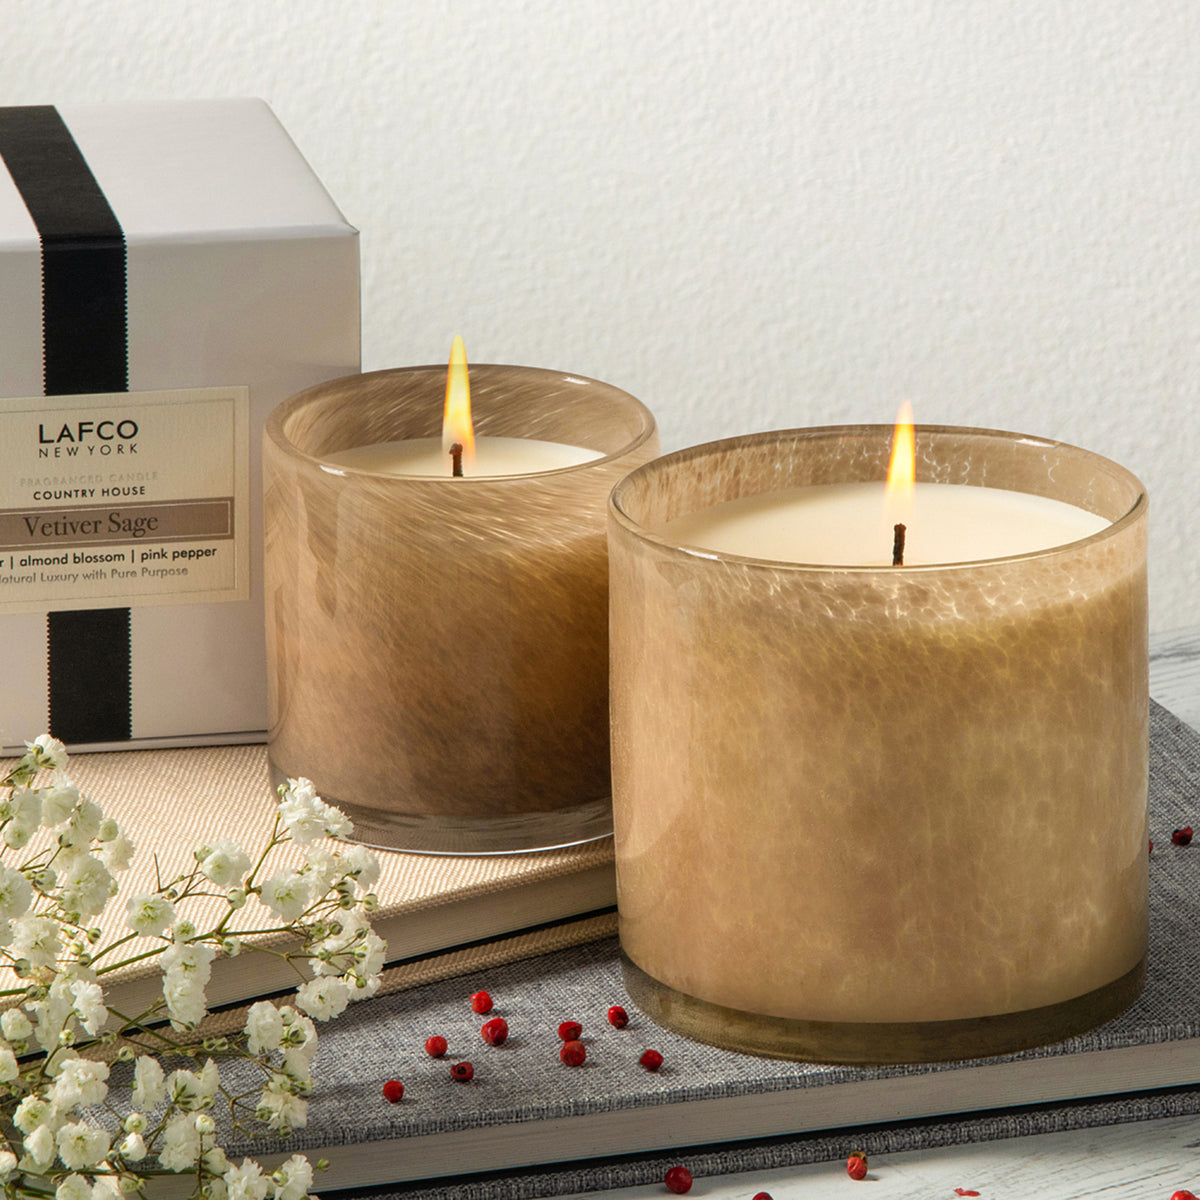 Lafco Vetiver Sage Signature Candle .